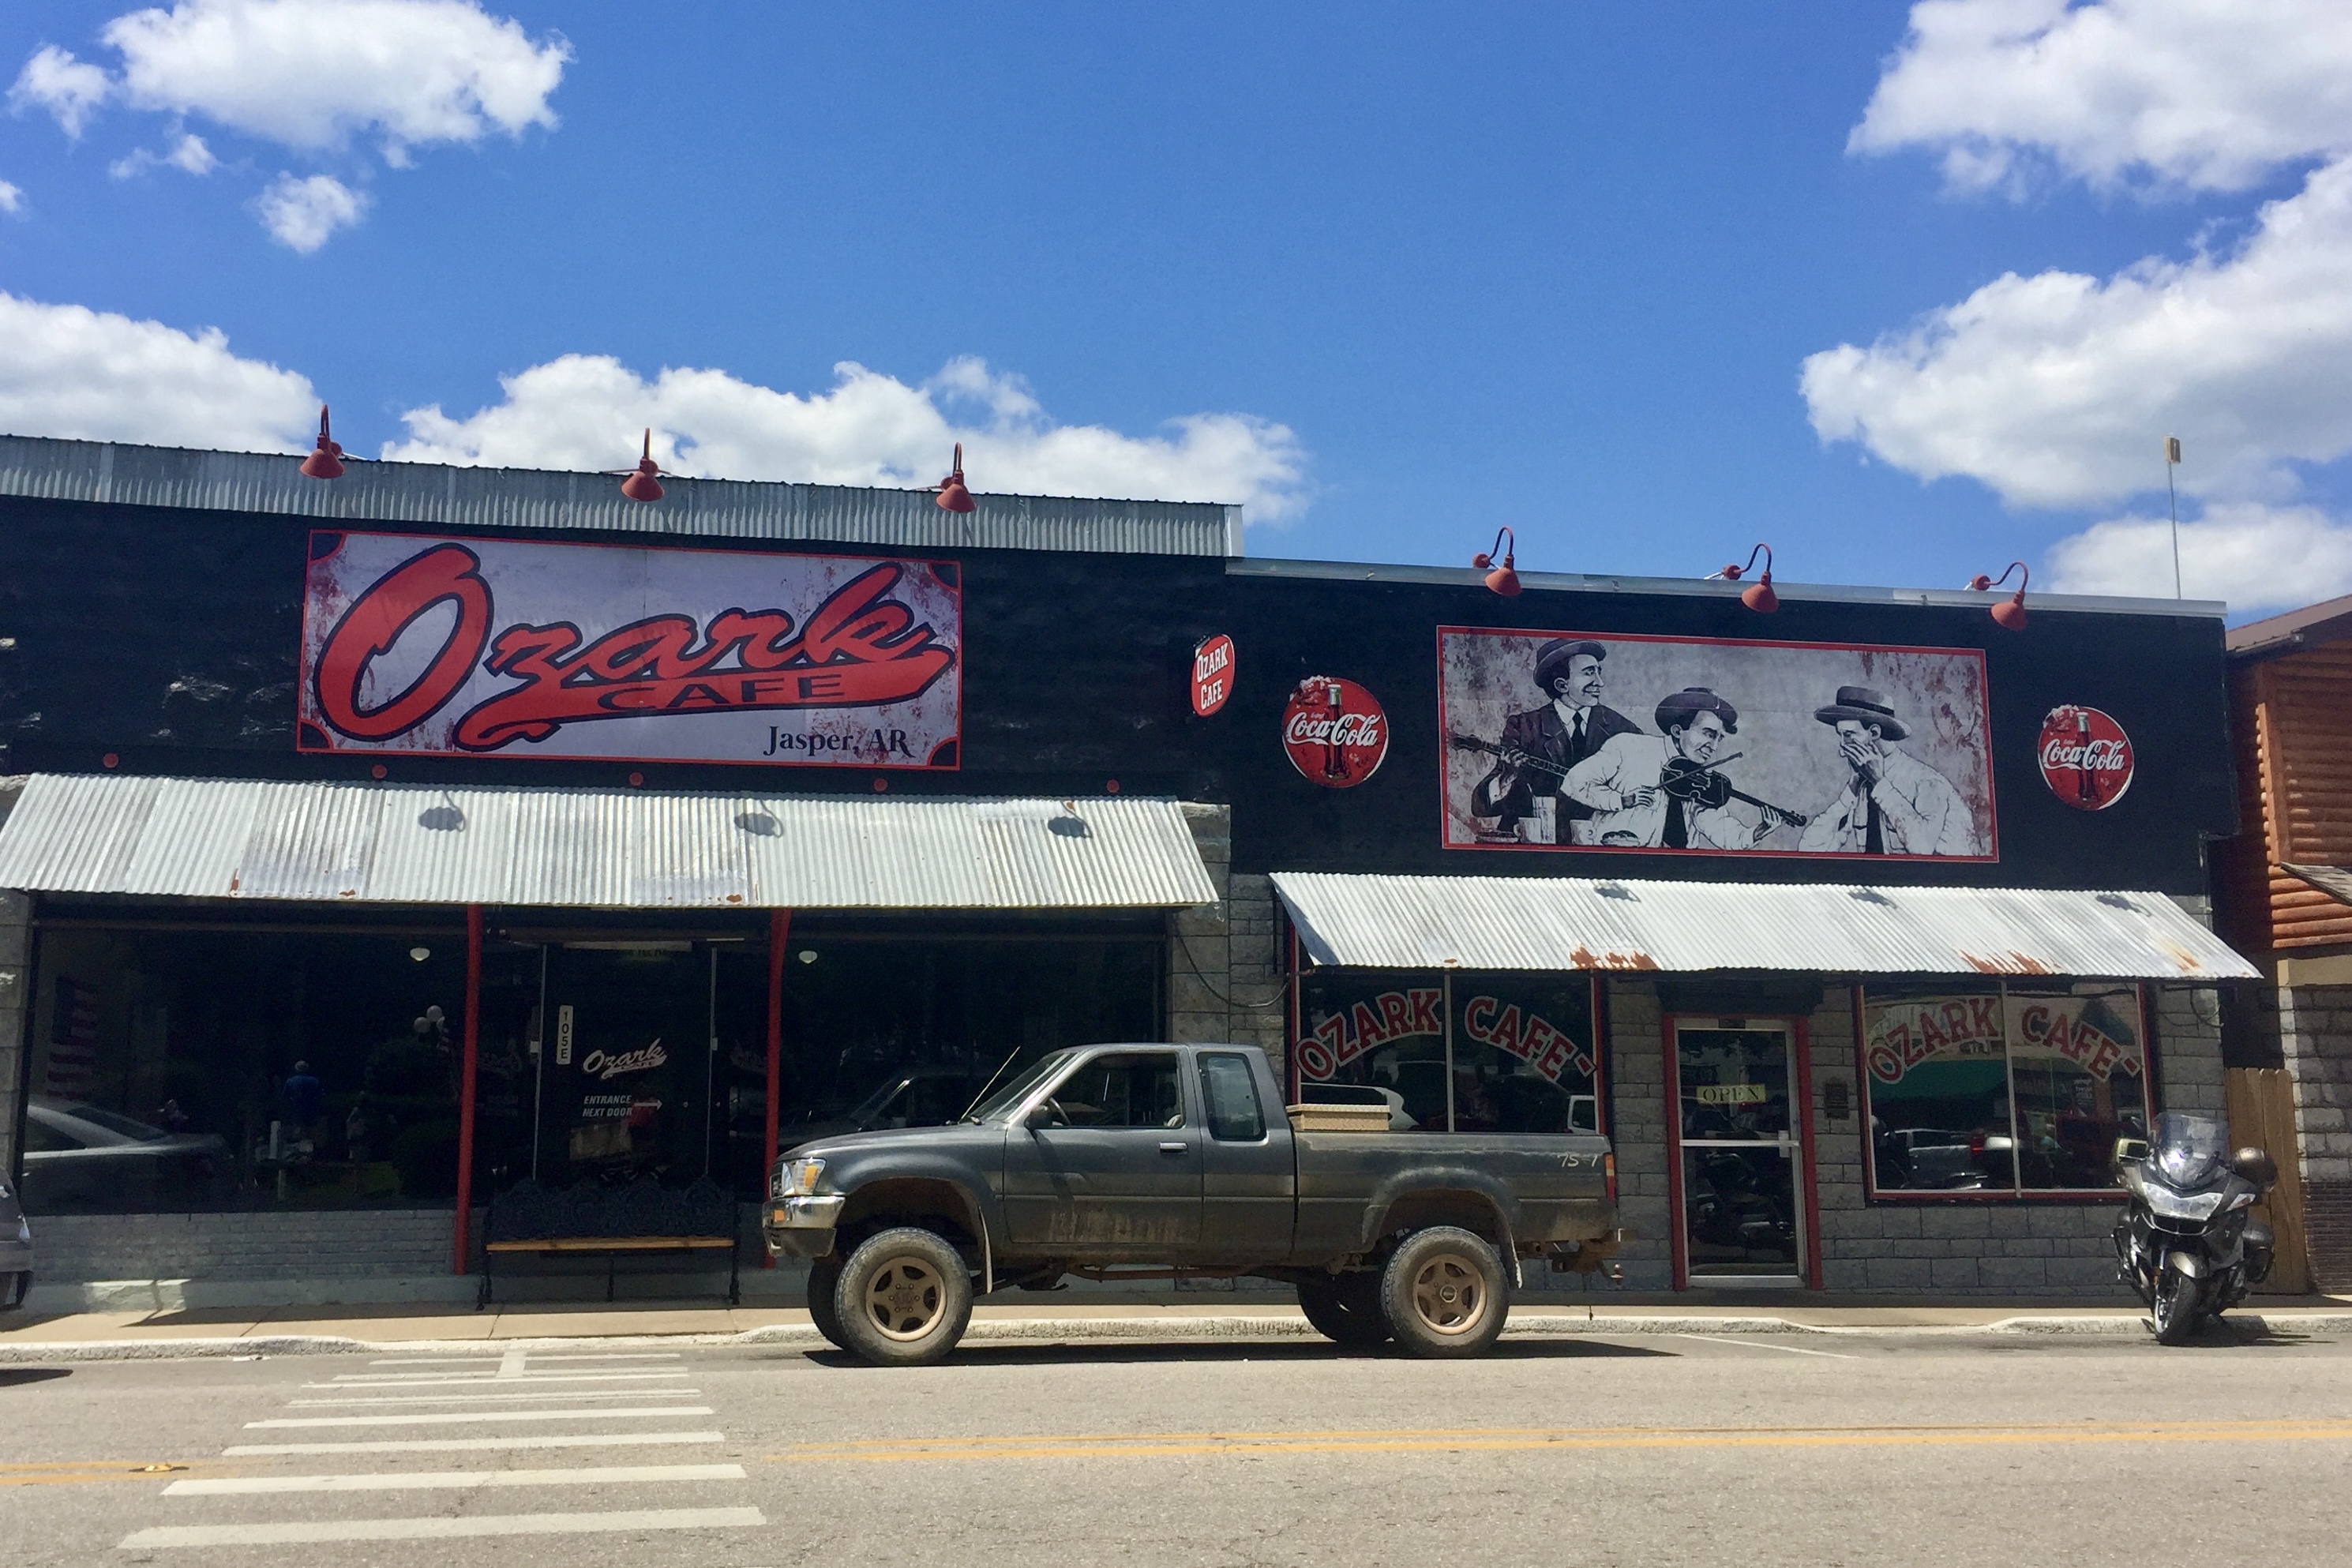 A truck is parked outside a restaurant with a sign reading "Ozark Cafe"